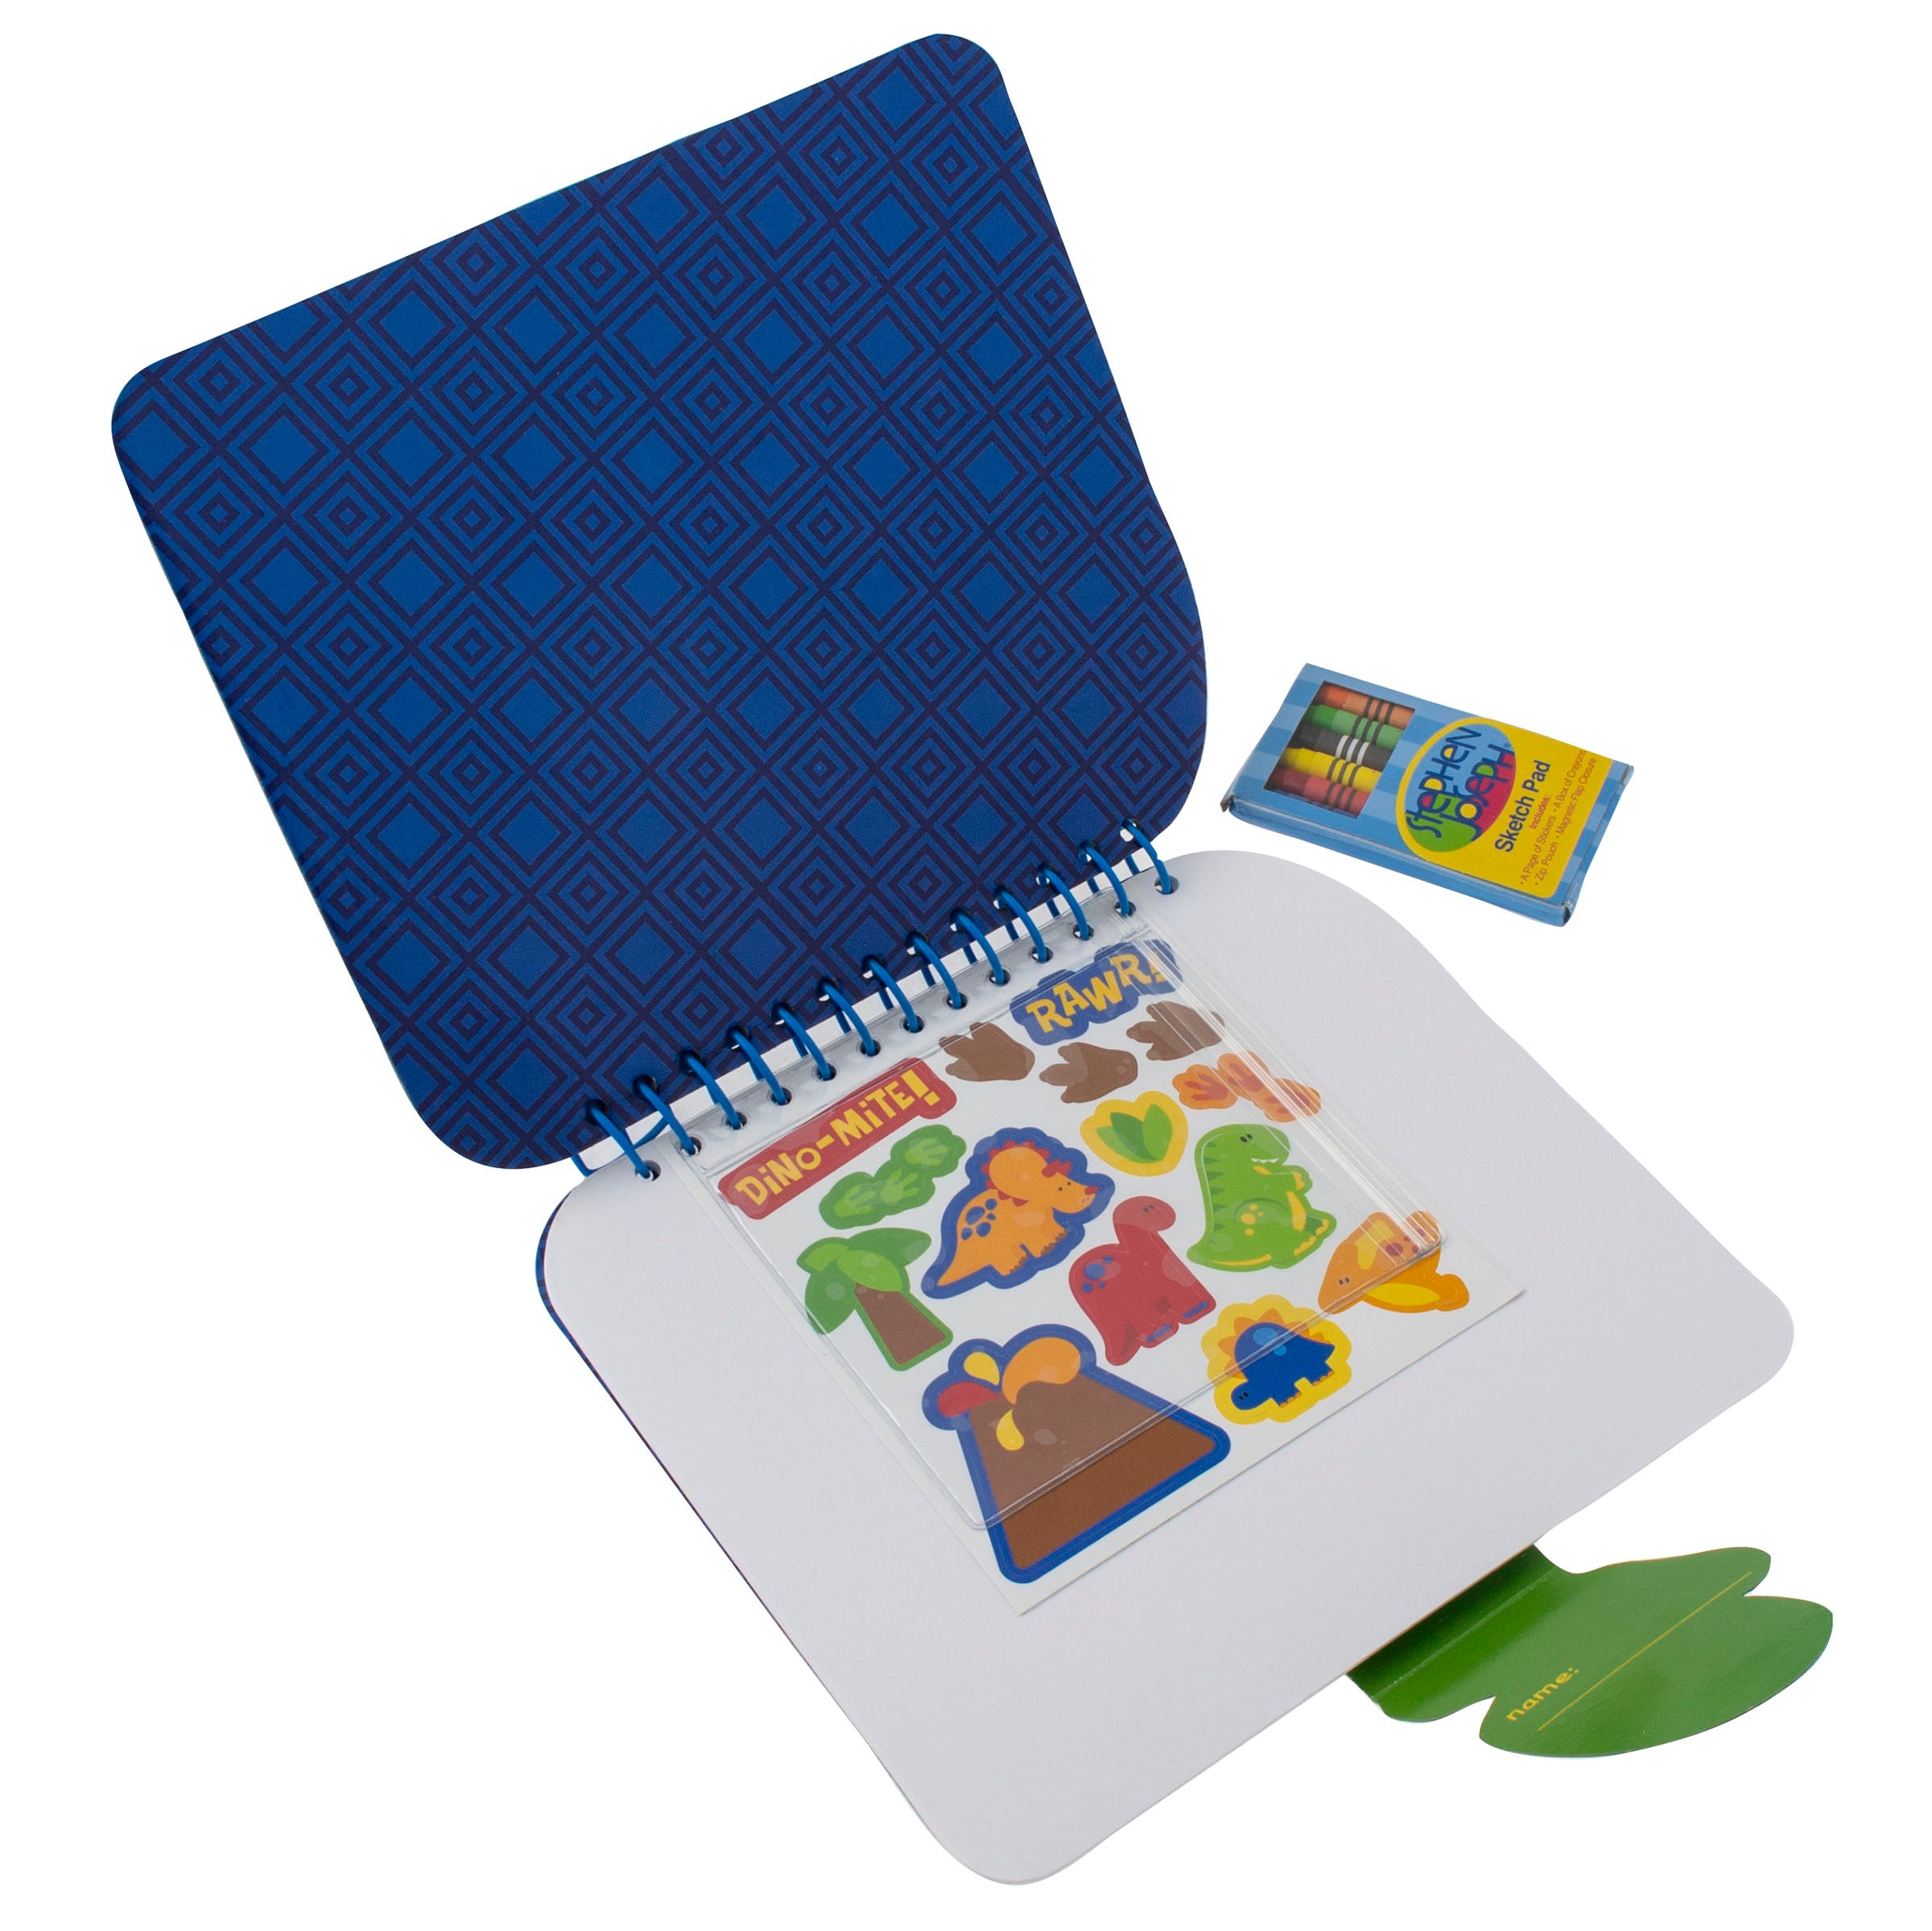 Shop Sketch Pad For Drawing For Kids online